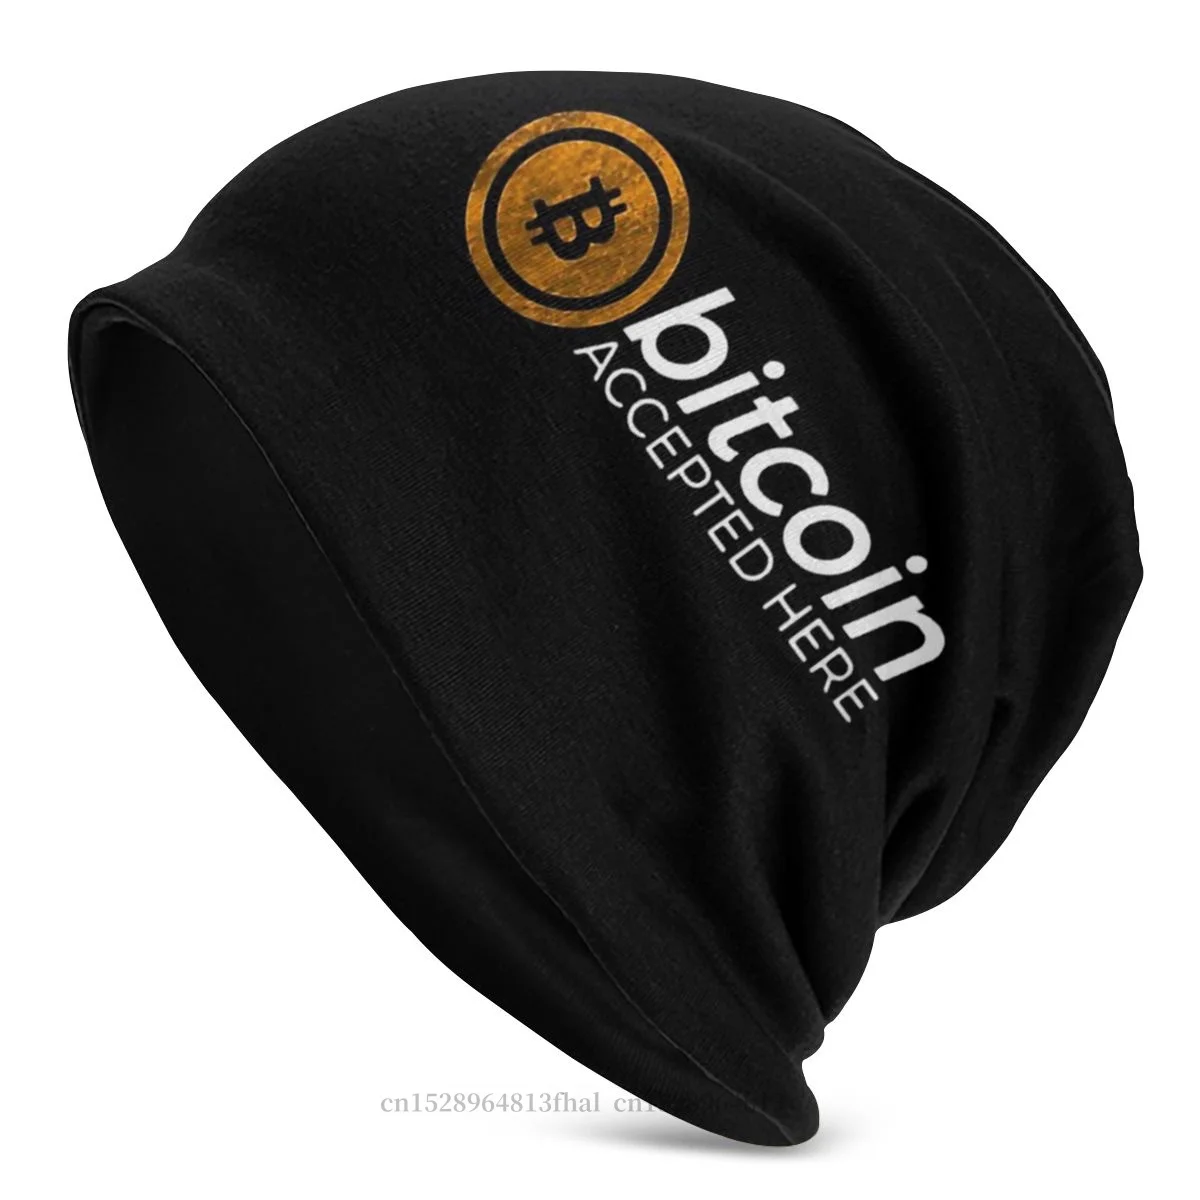 

Bitcoin Cryptocurrency Meme Winter Warm Beanie Hats Accepted Here Knit Hat Bonnet Hipster Skullies Beanies Caps Men Women's